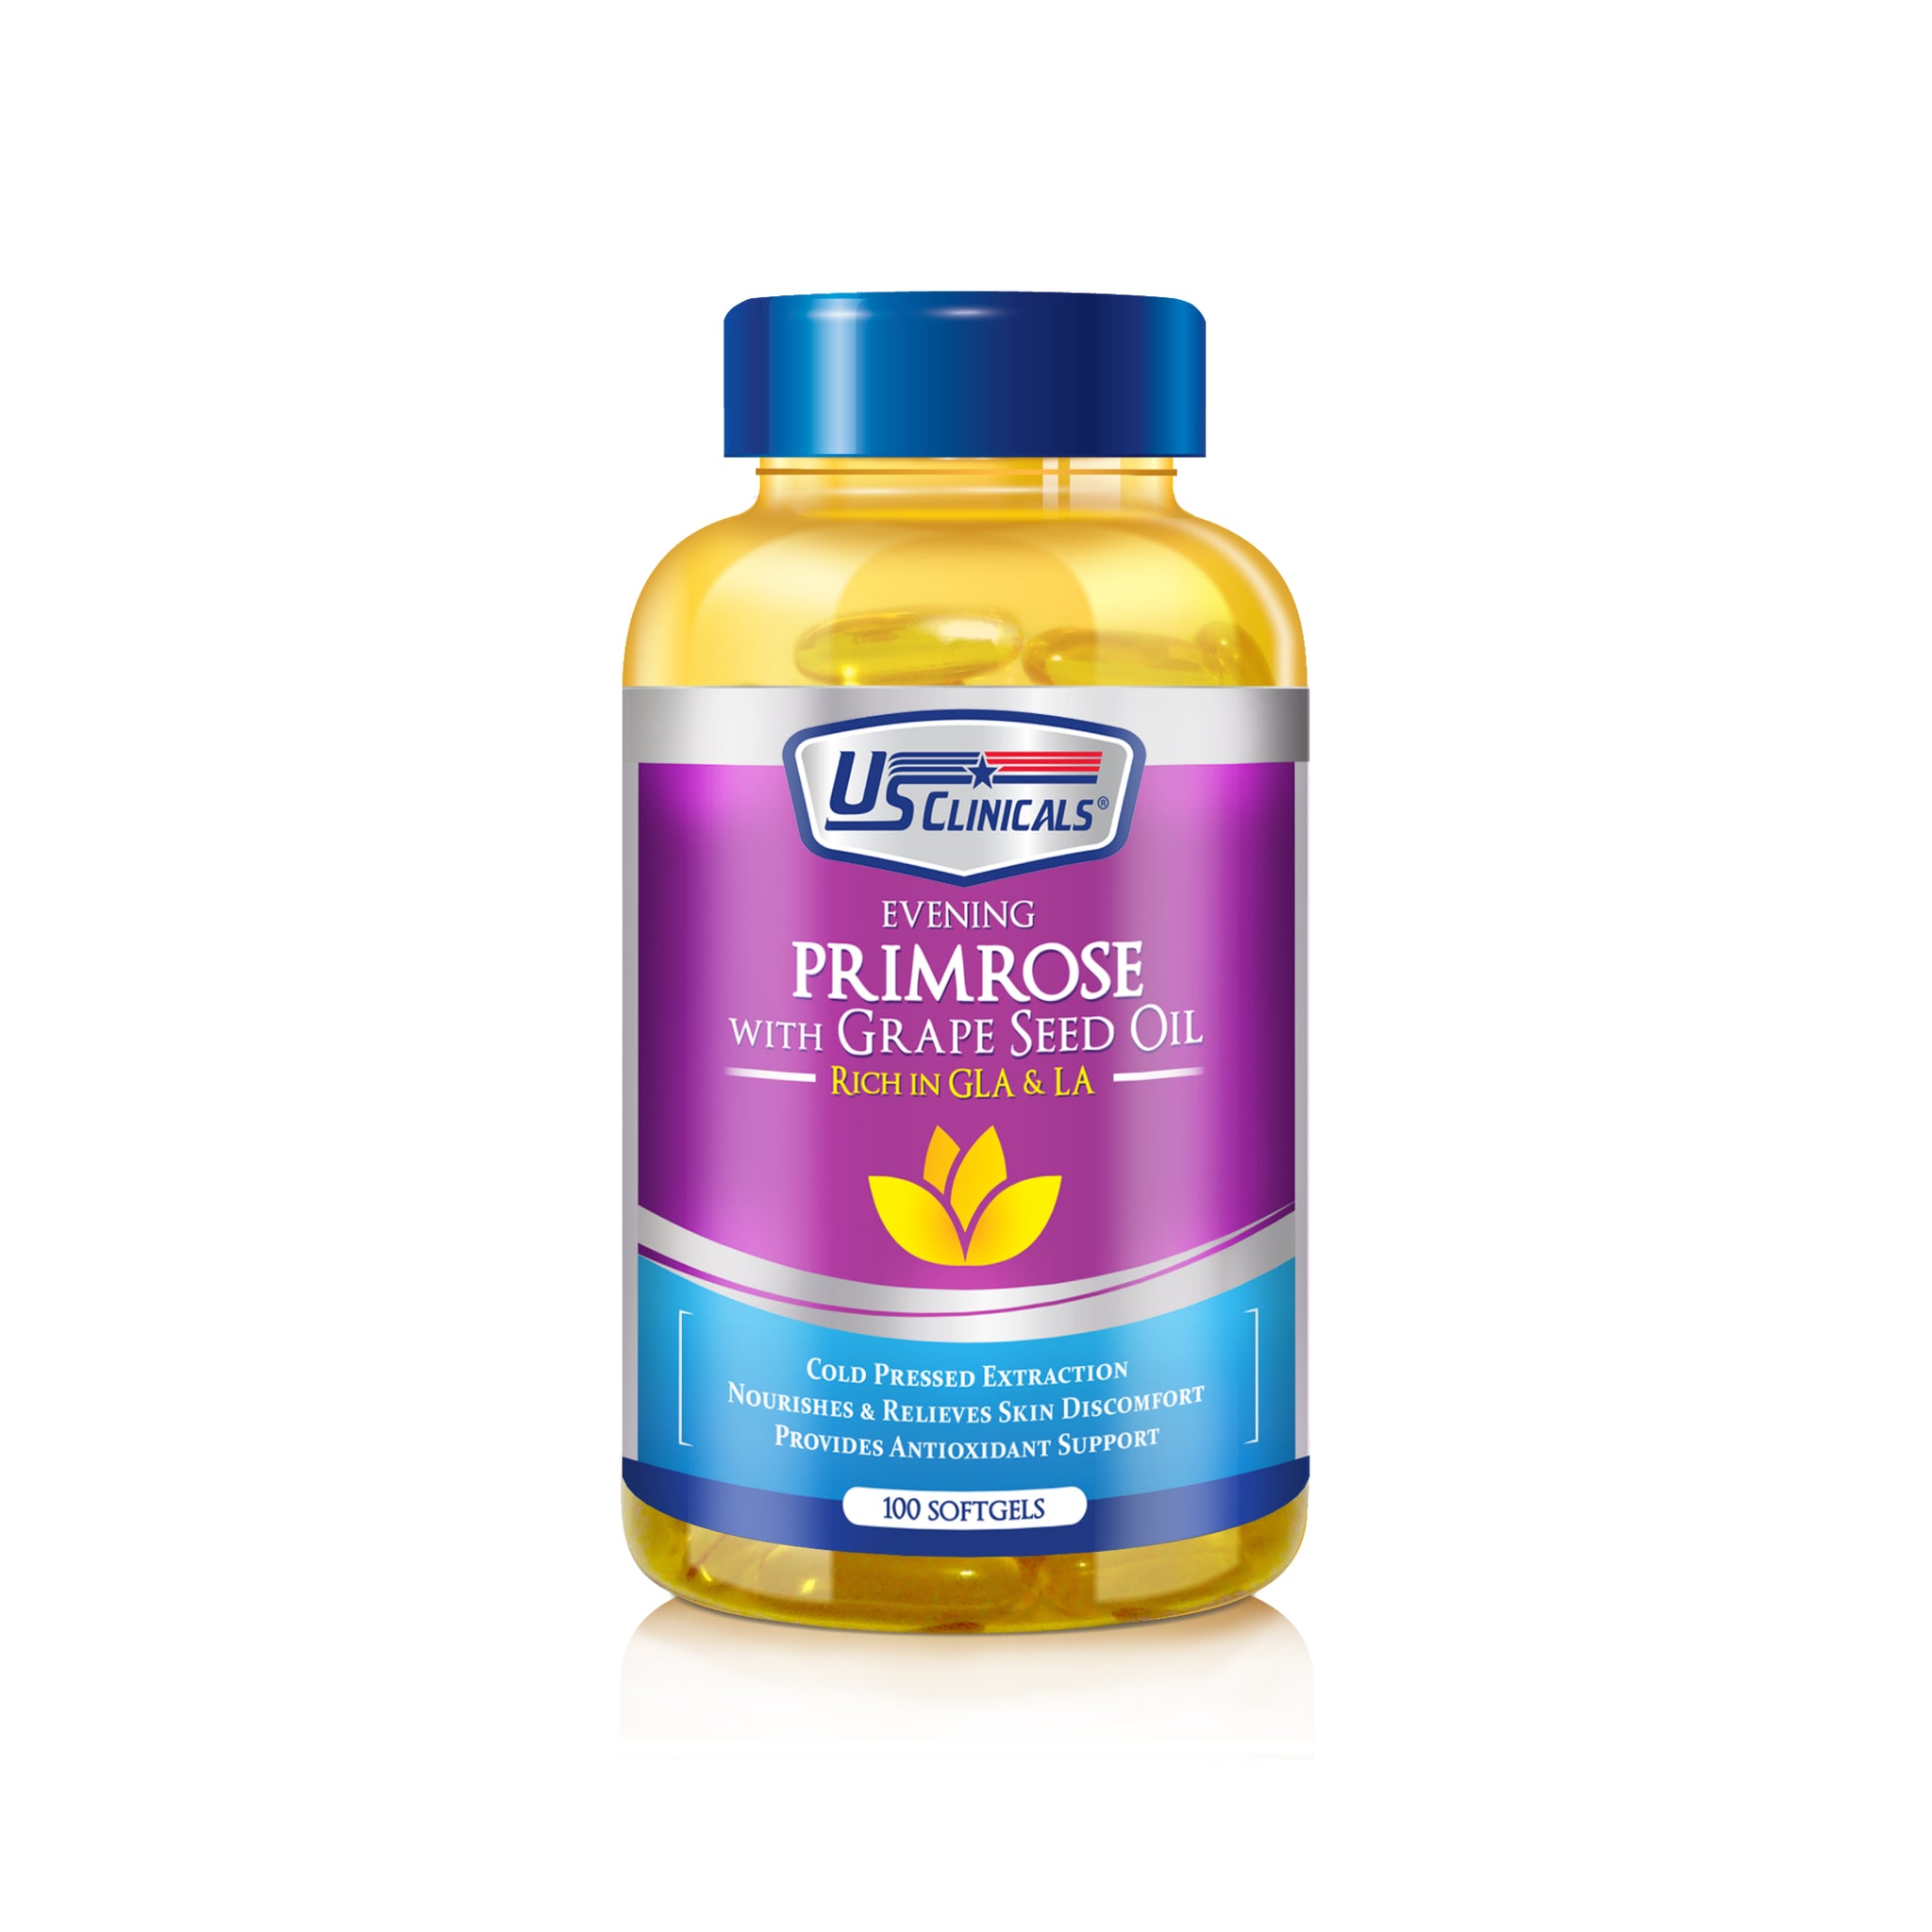 US Clinicals® Evening Primrose with Grape Seed Oil.